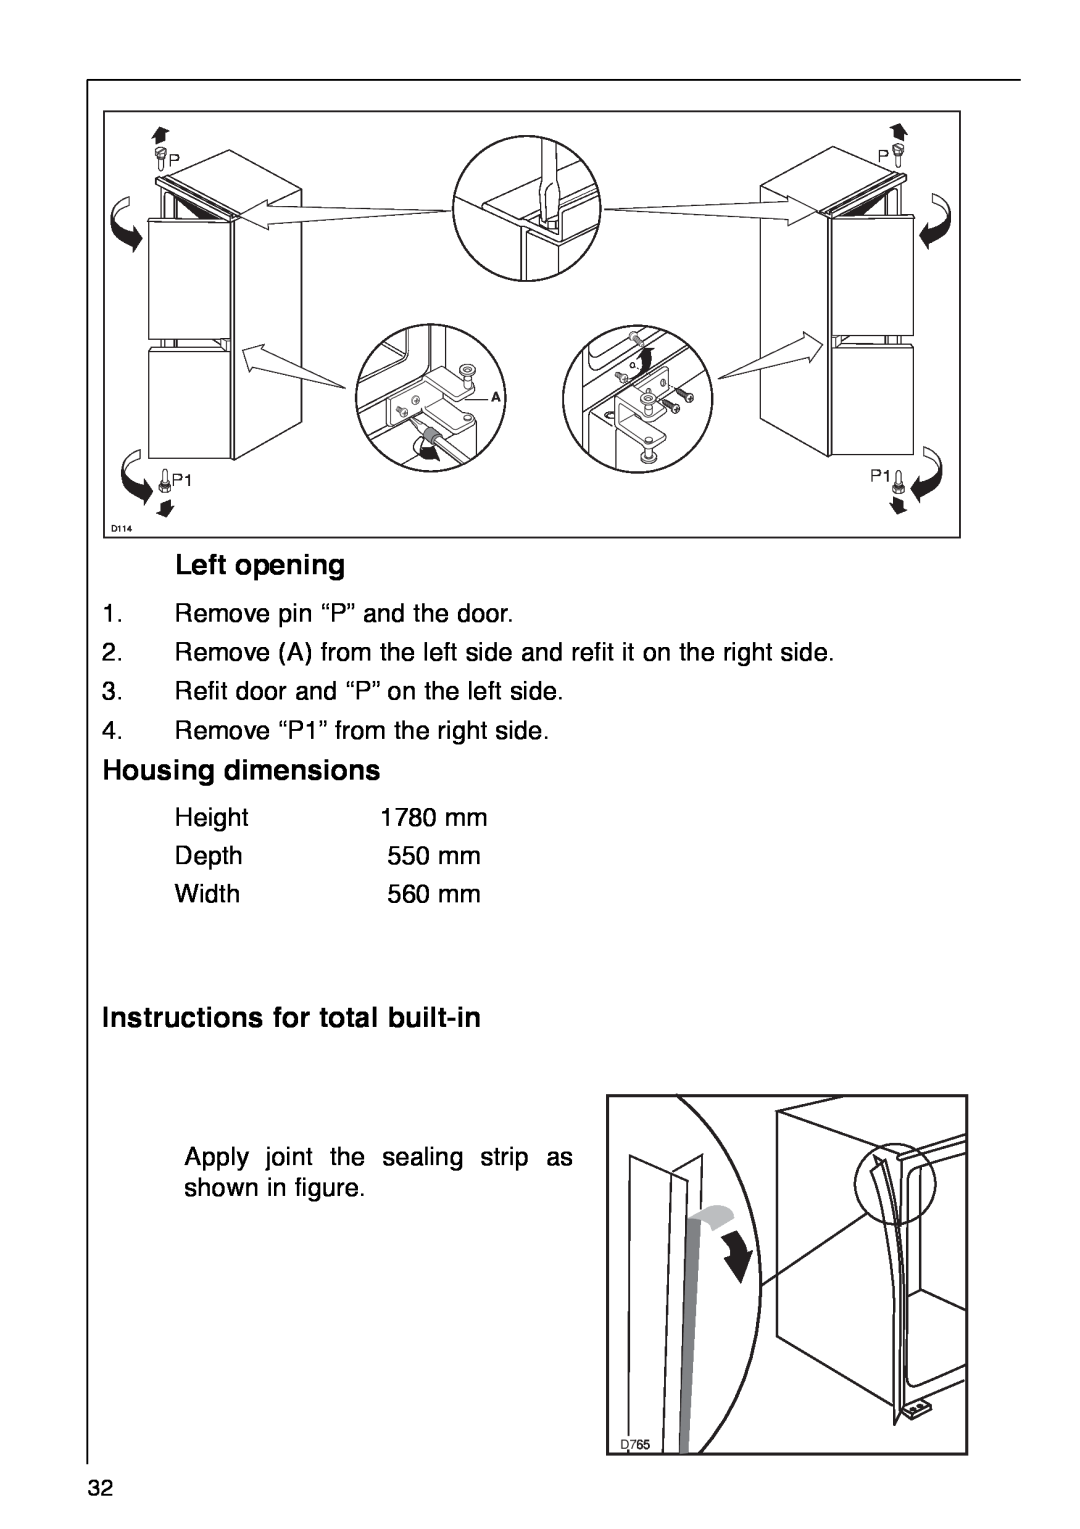 AEG 290-6I installation instructions Left opening, Housing dimensions, Instructions for total built-in 